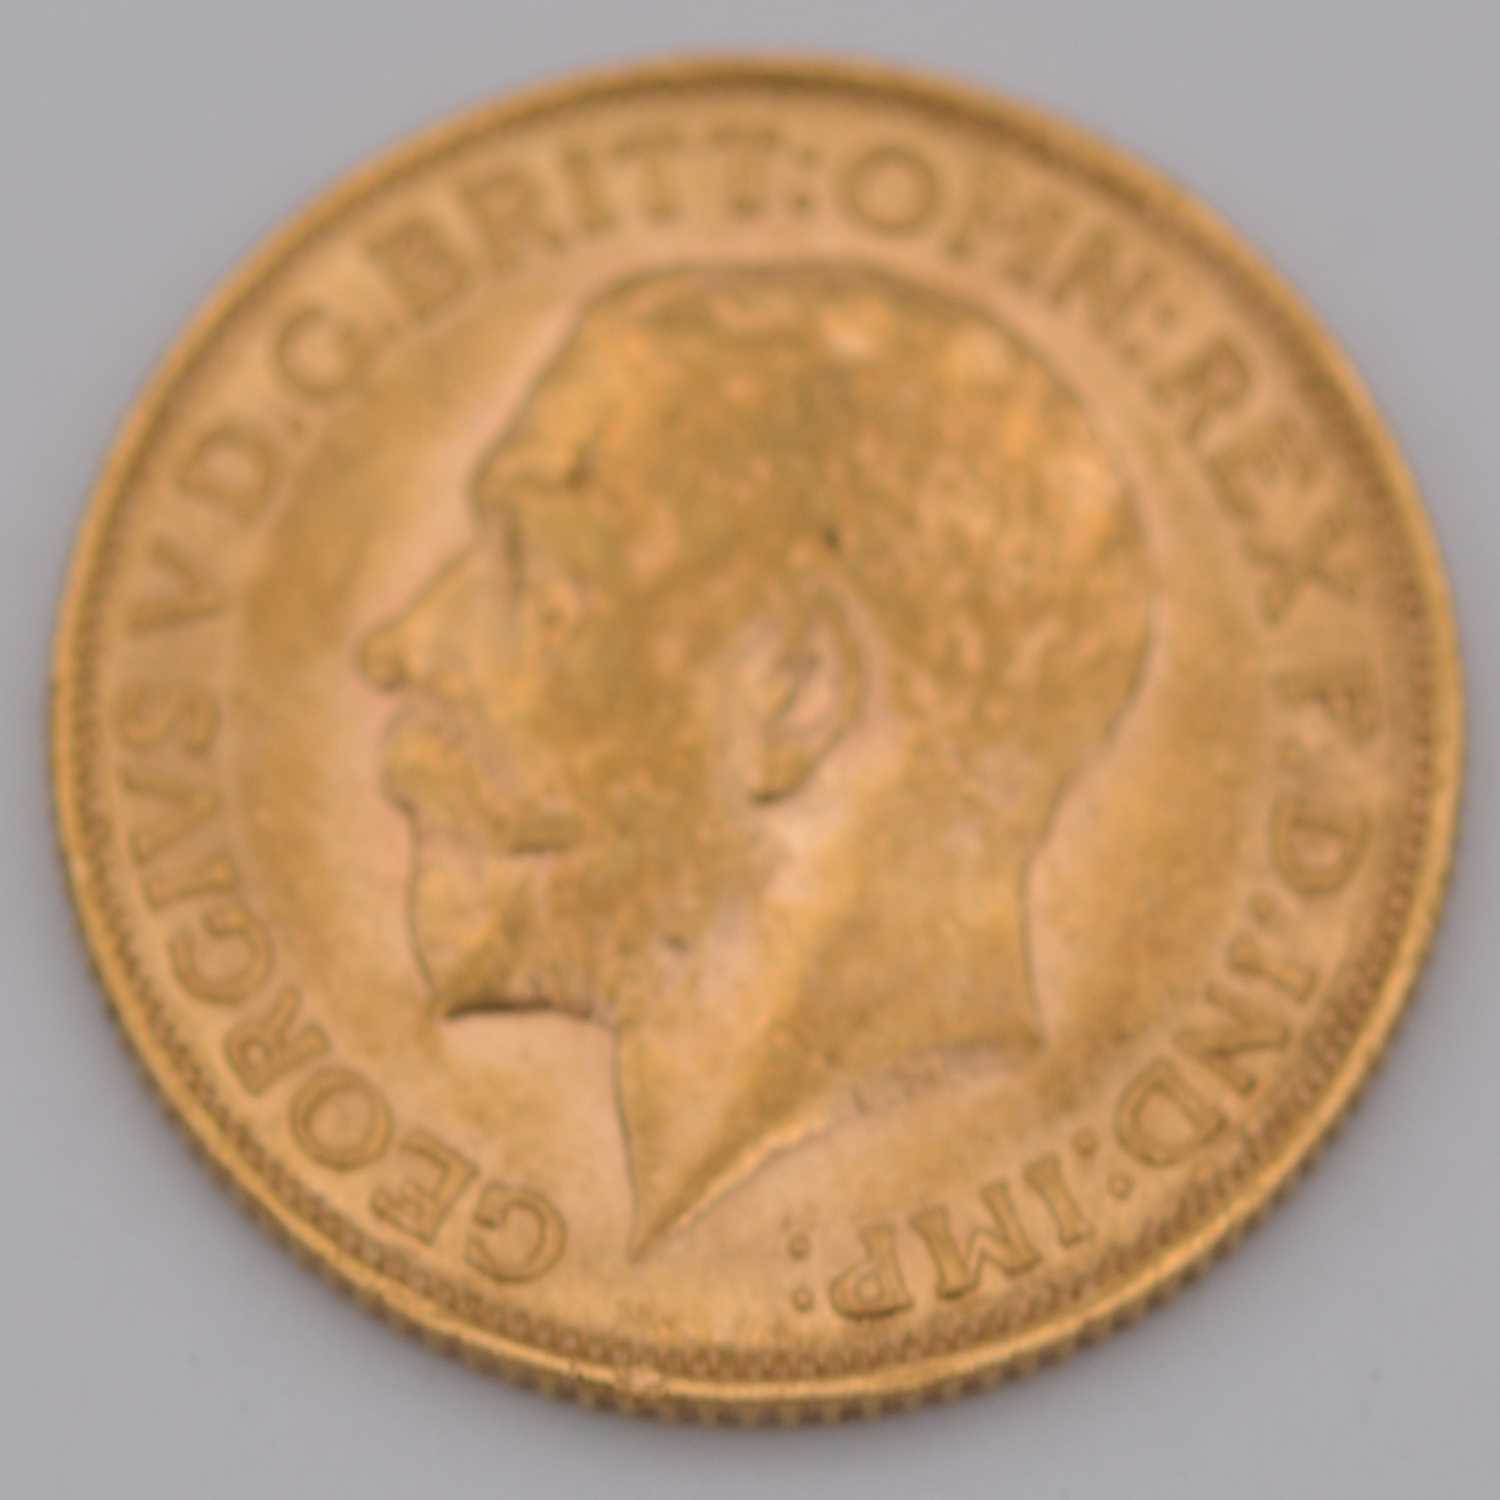 George V gold Sovereign coin, 1912, 8g. - Image 2 of 2